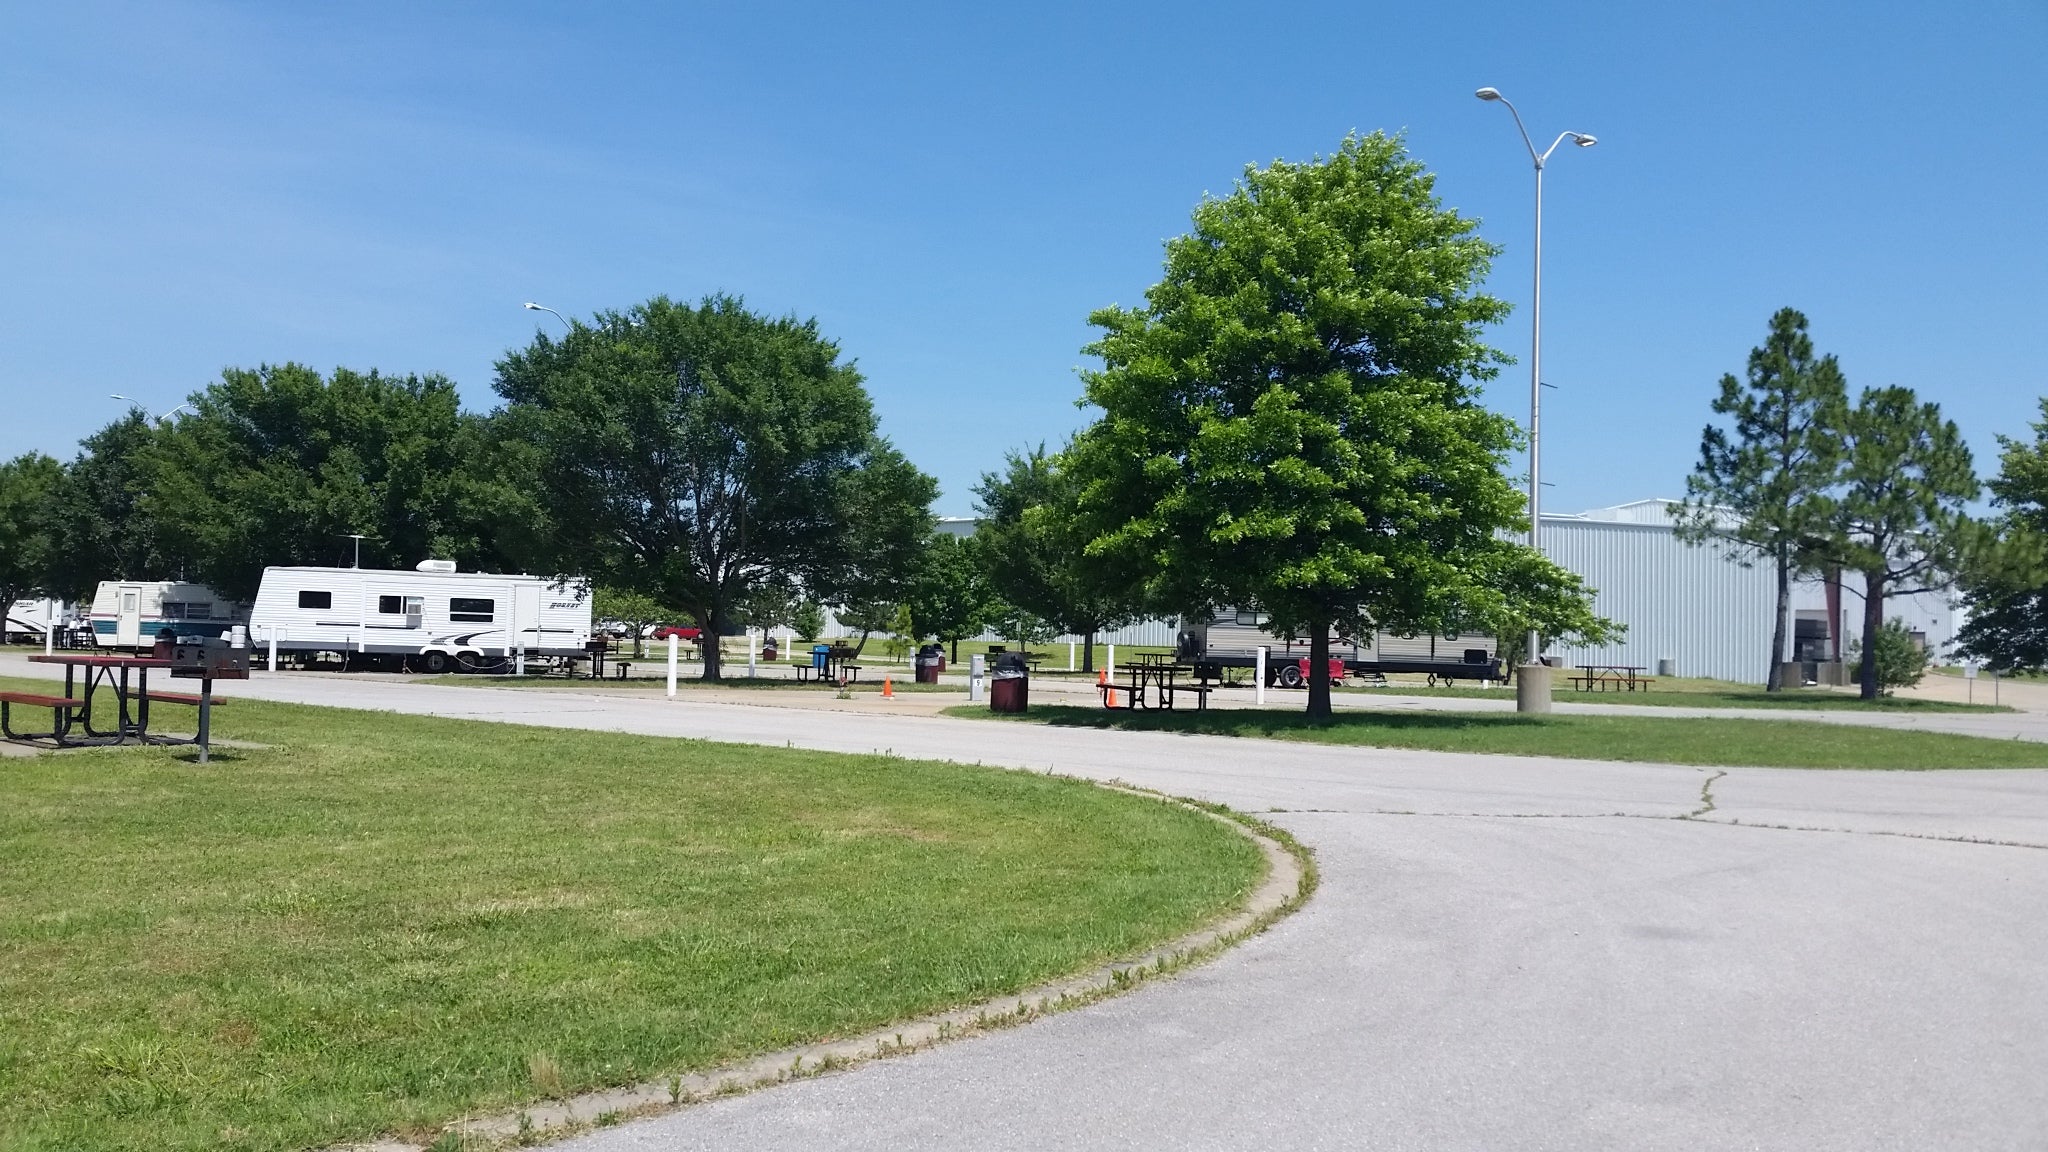 The RV park is in the city of Claremore with many options for goods and services available.